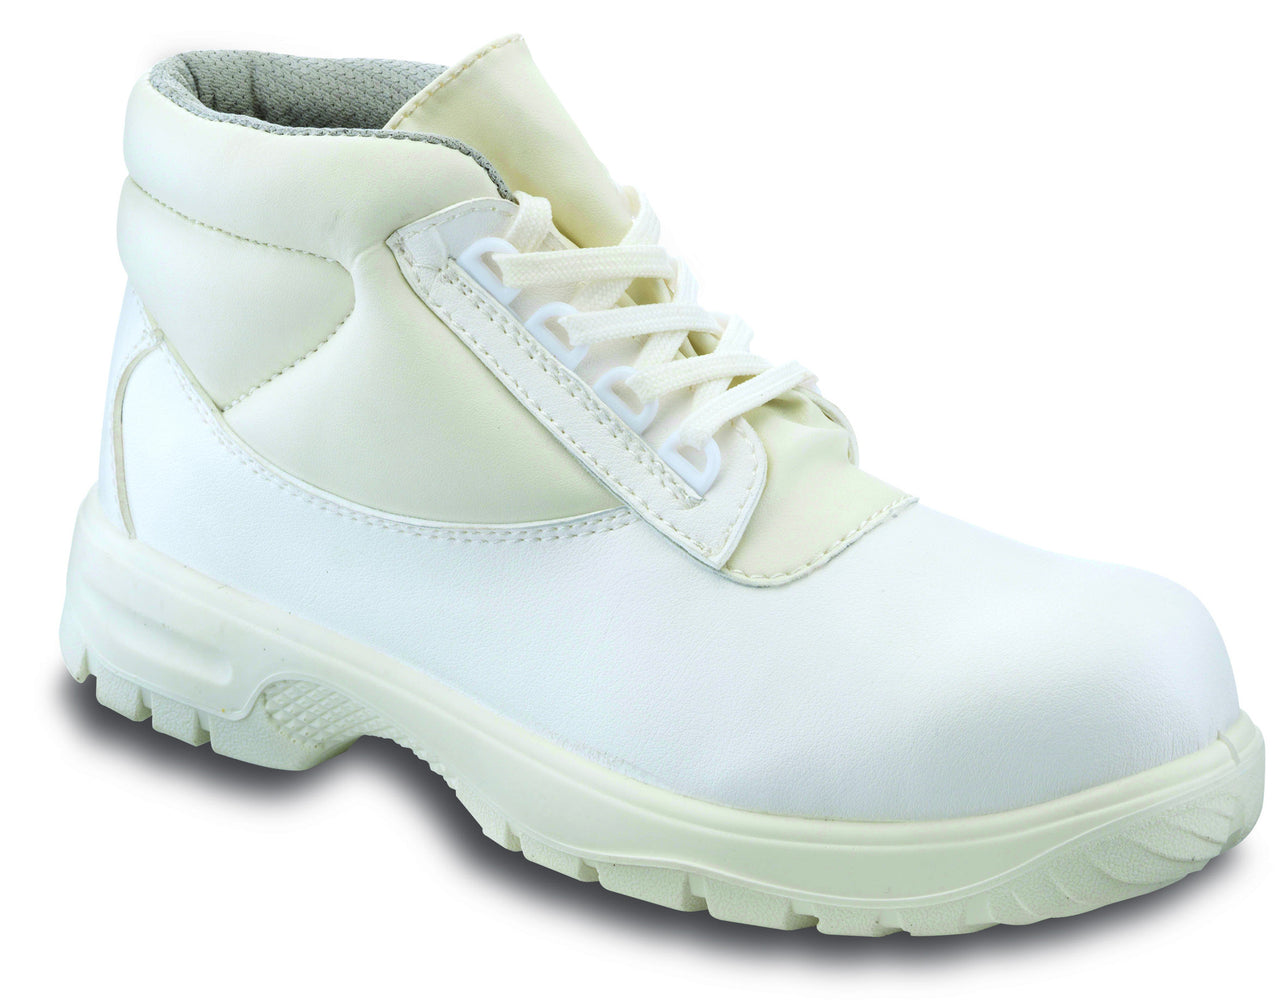 W422-White-PSF-Food-Safet-Boot